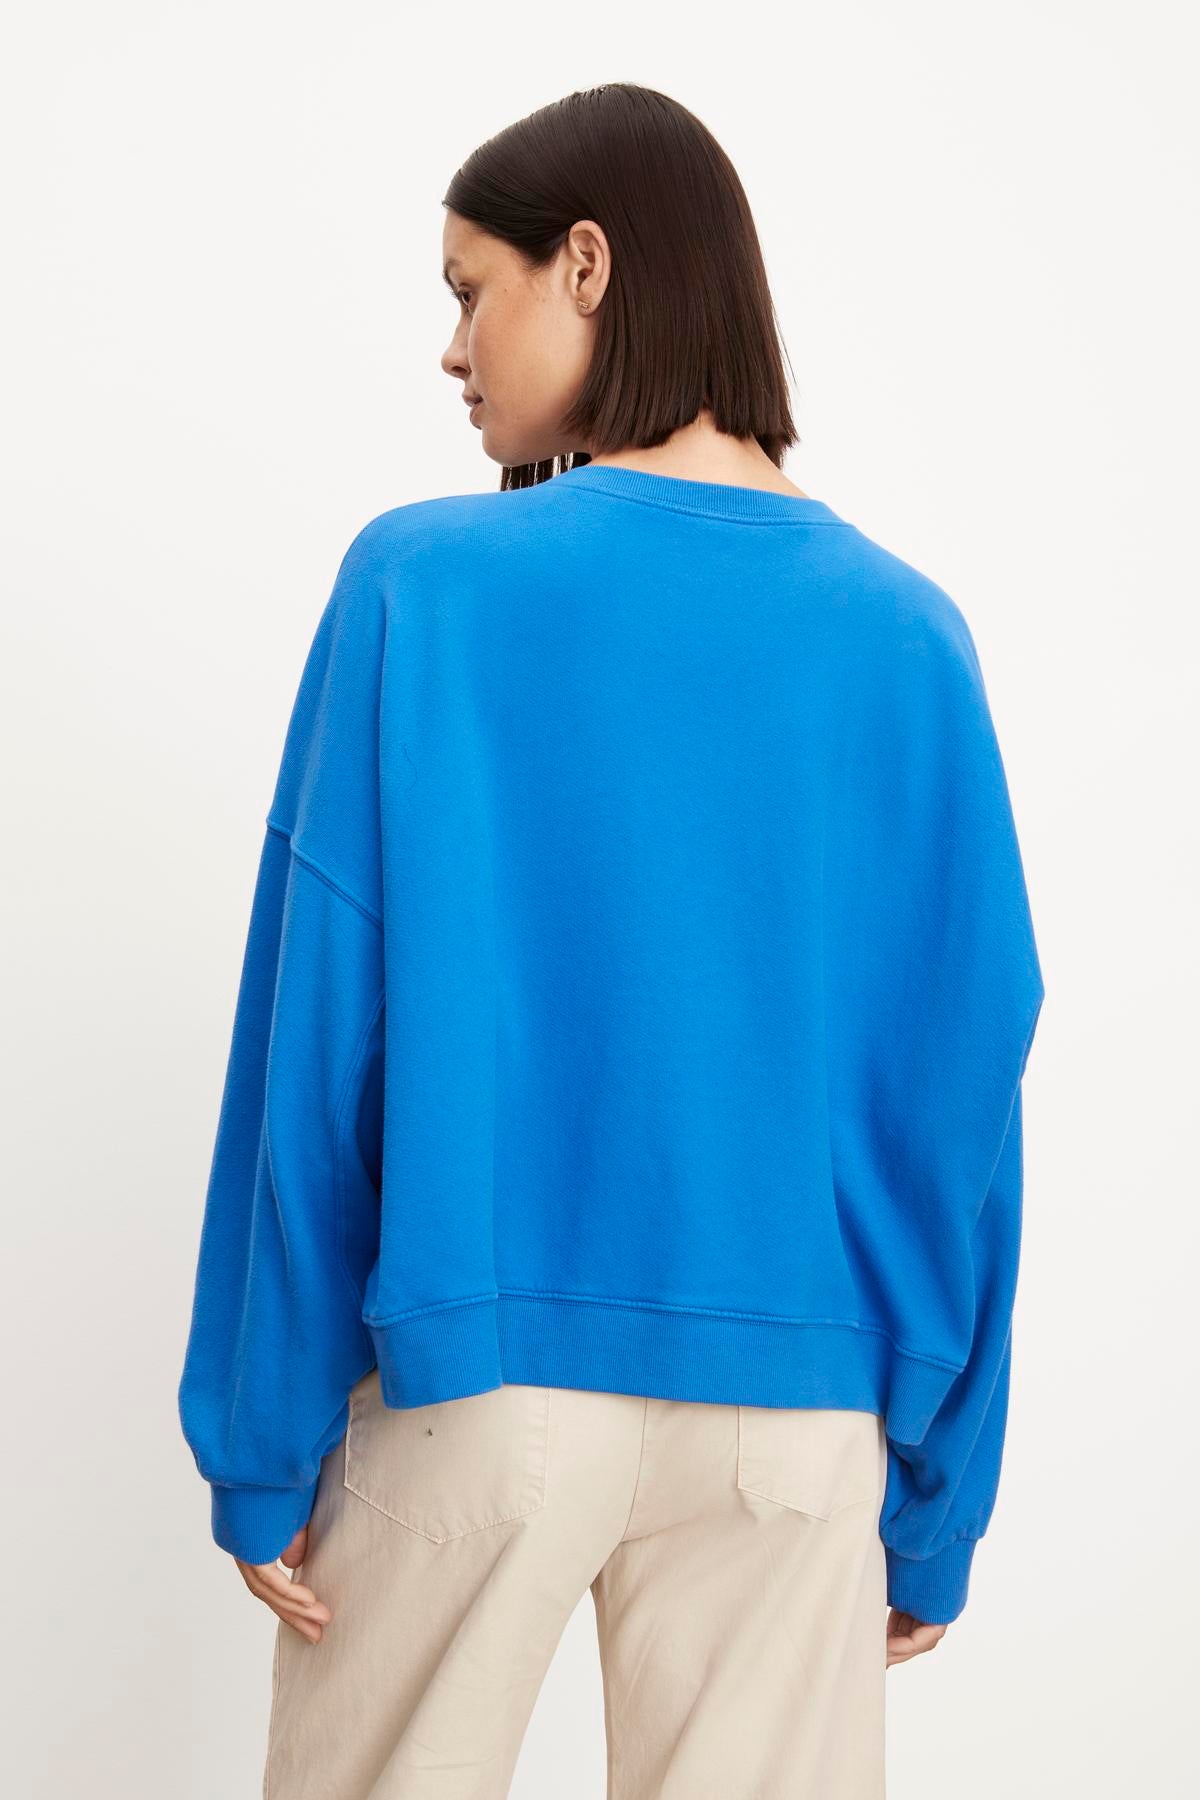 The back view of a woman wearing the Velvet by Graham & Spencer Margot Oversized Sweatshirt in soft fleece fabric.-35961316245697